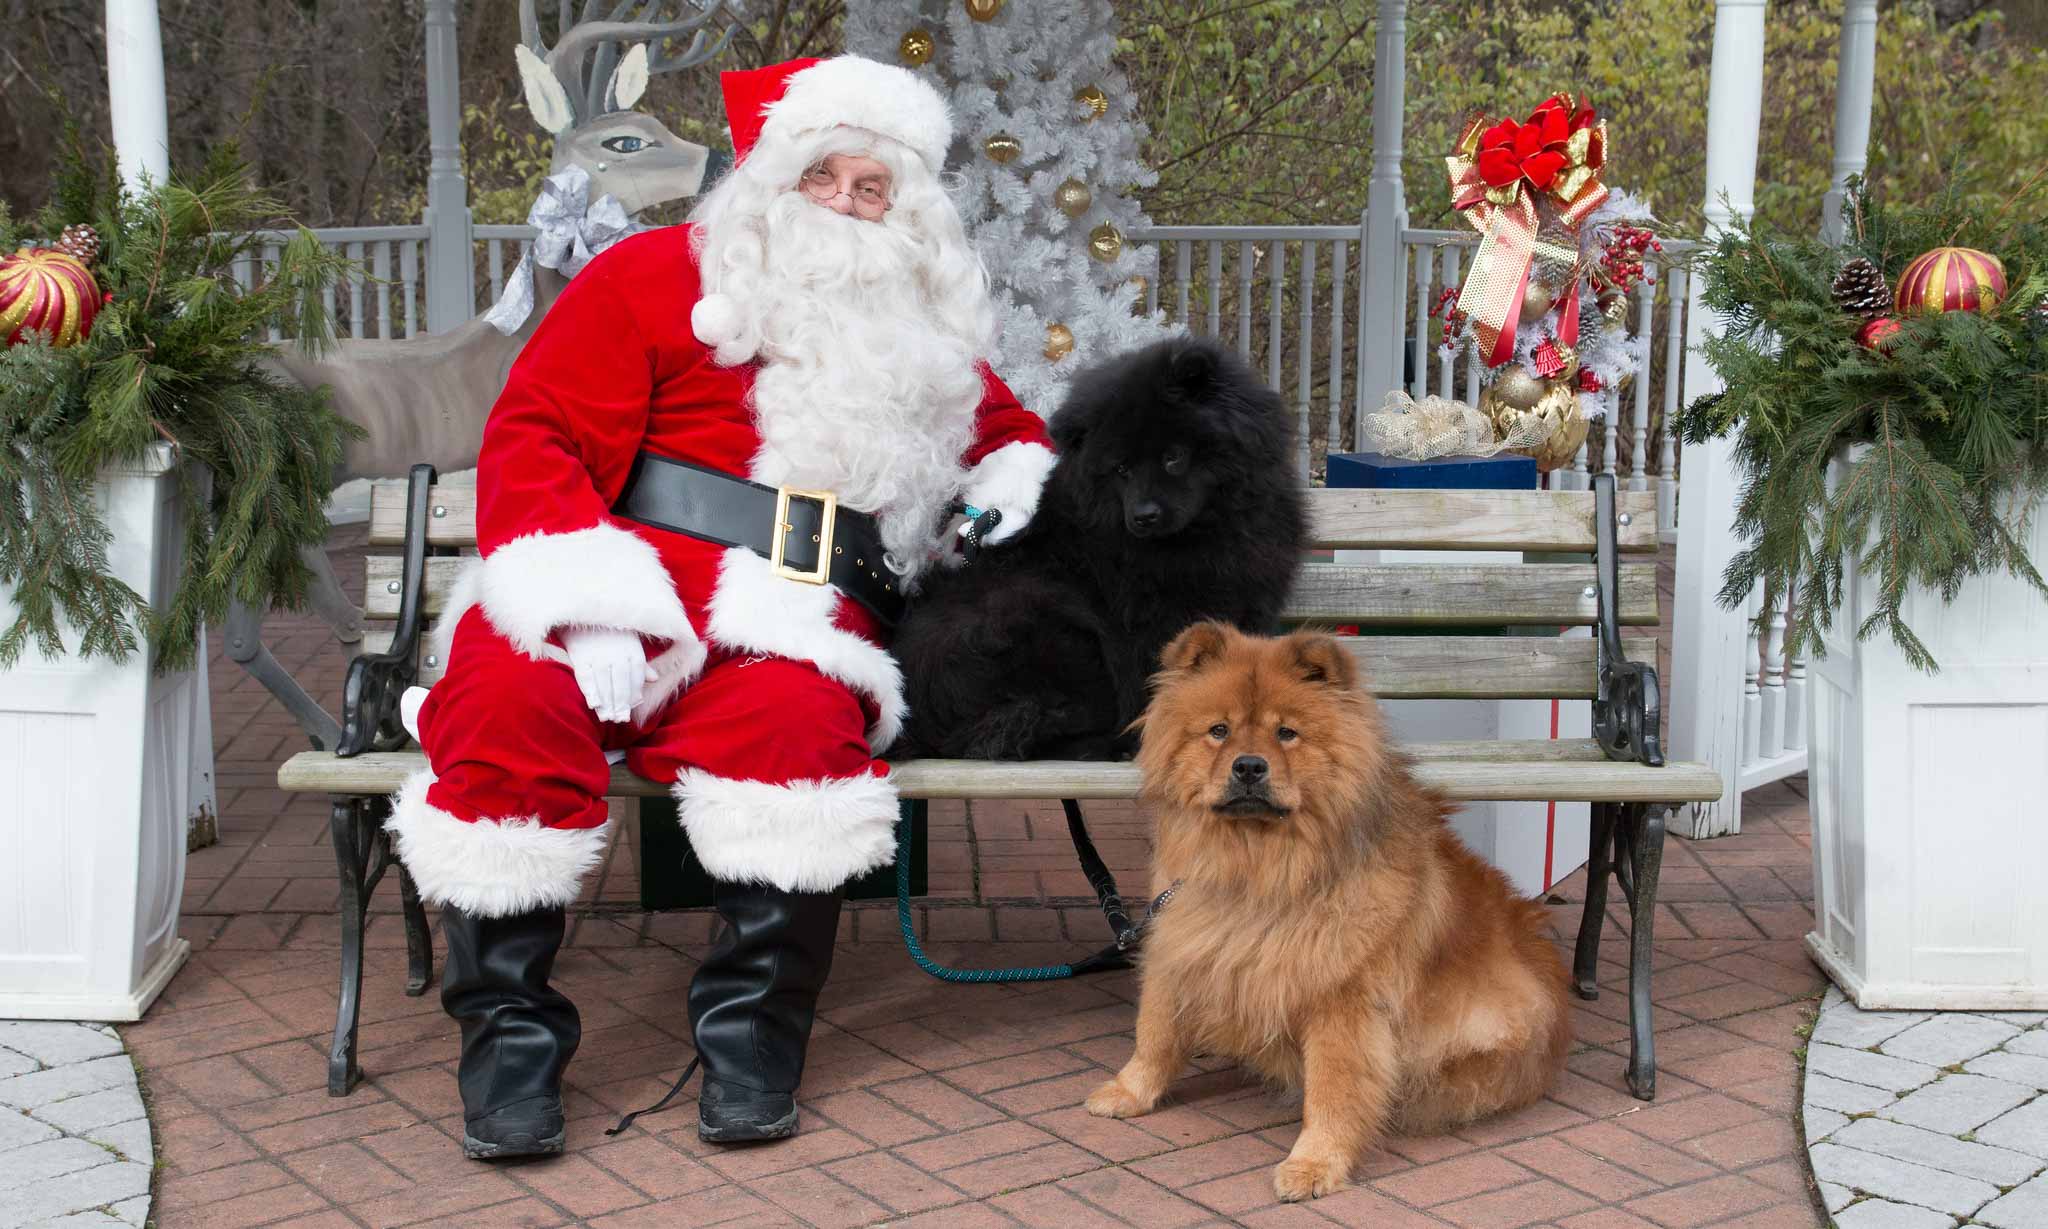 HoliDOG Pictures with Santa